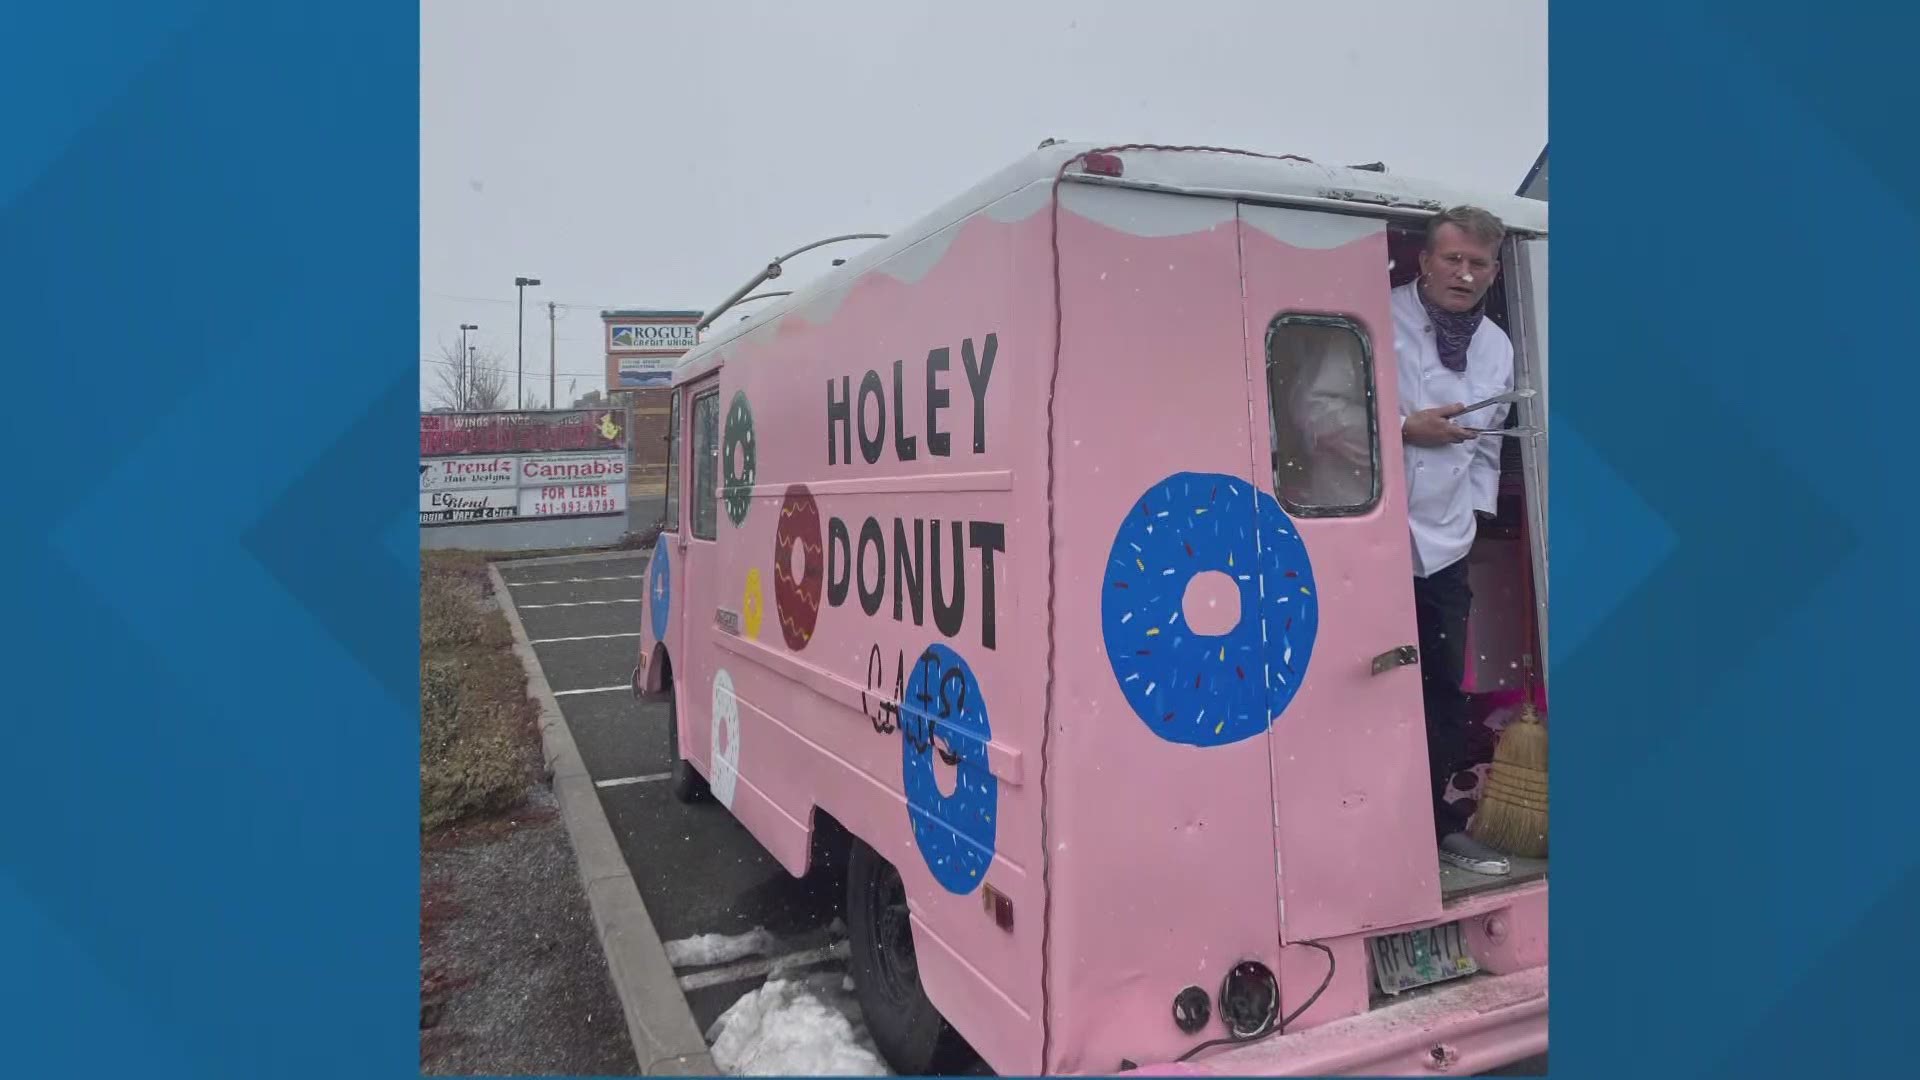 A family bakery in Oregon has been forced to change its name after a lawsuit from the Maine-based company, The Holy Donut.